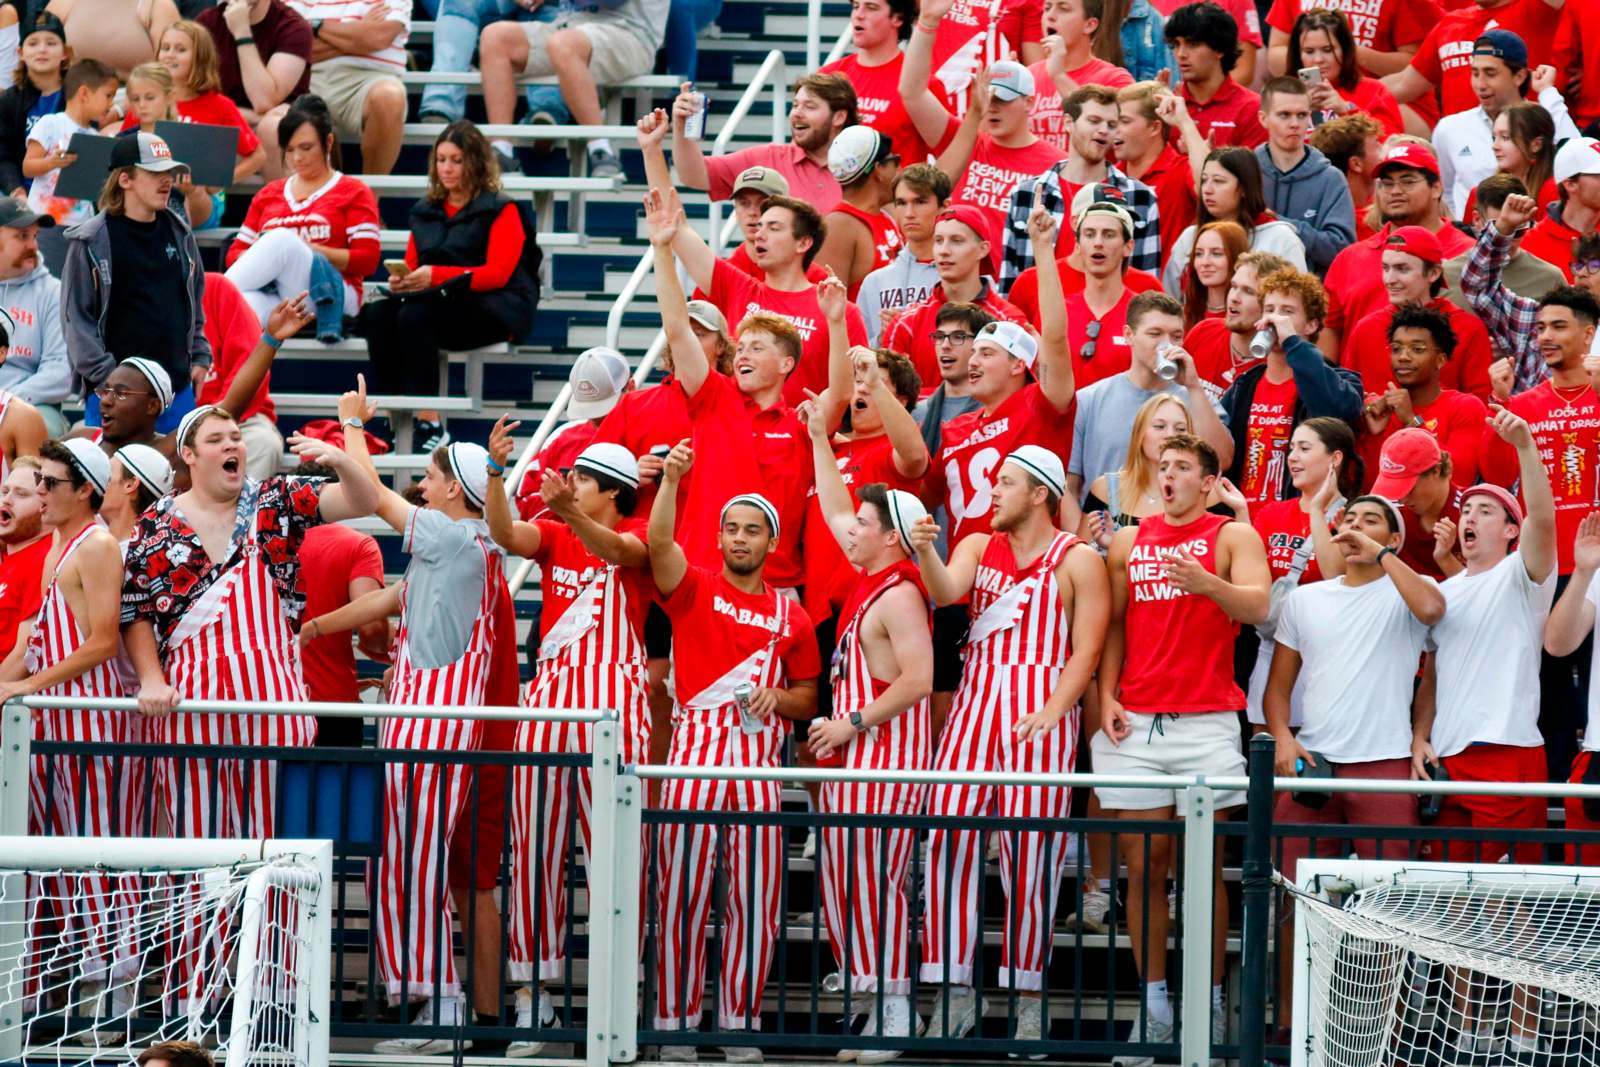 a group of people in red and white striped uniforms